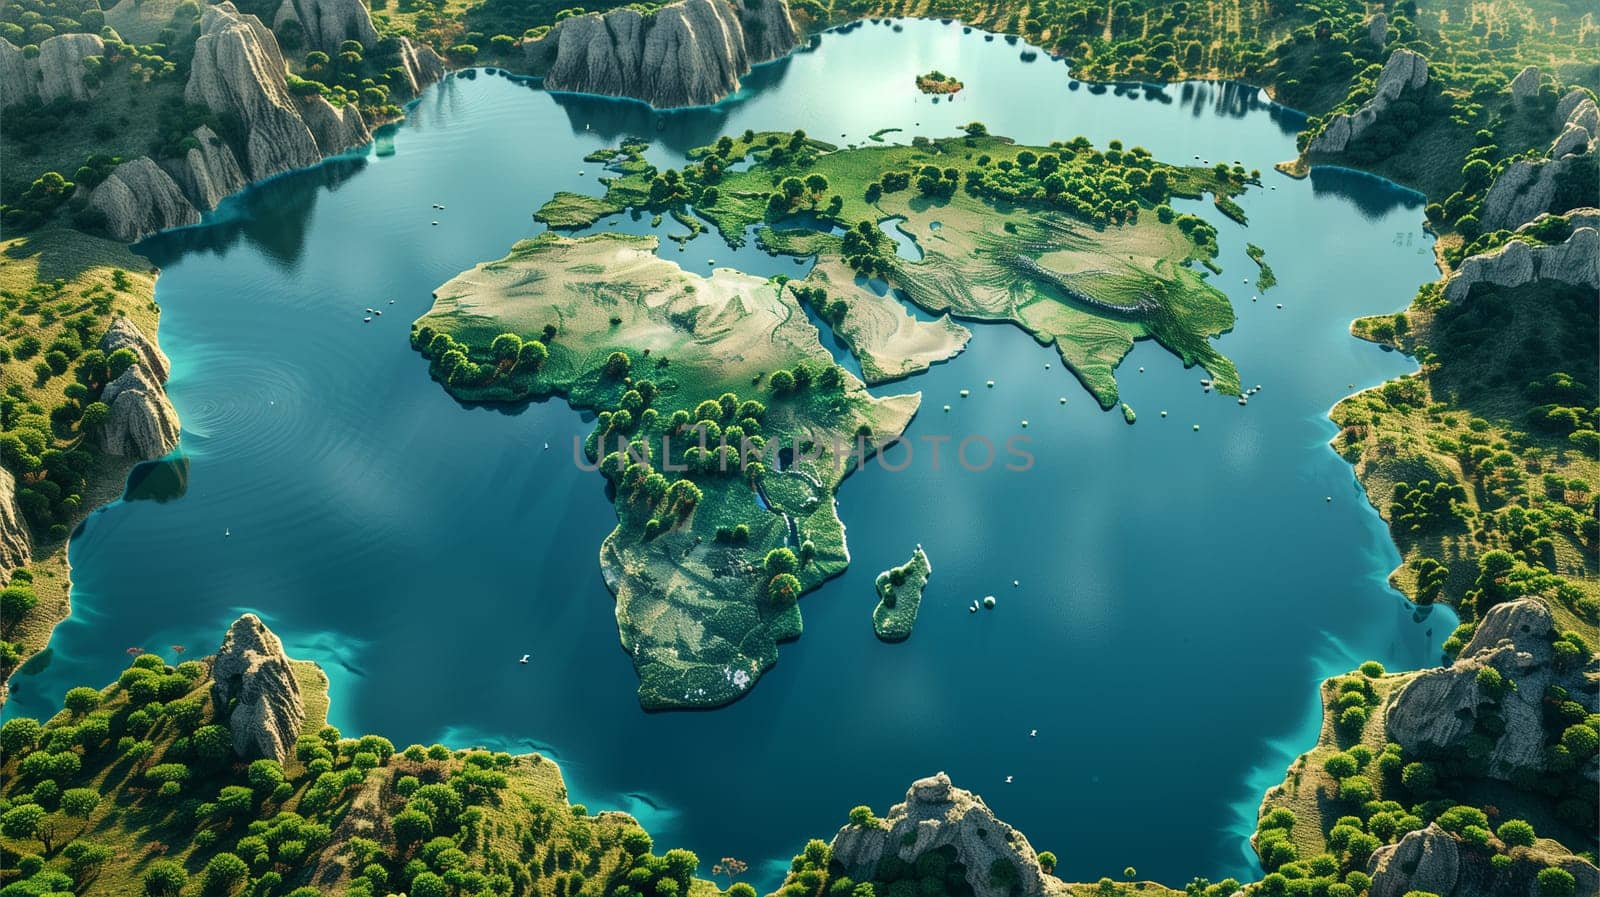 Miniature Model of Continent Africa Surrounded by Water and Greenery by Sd28DimoN_1976